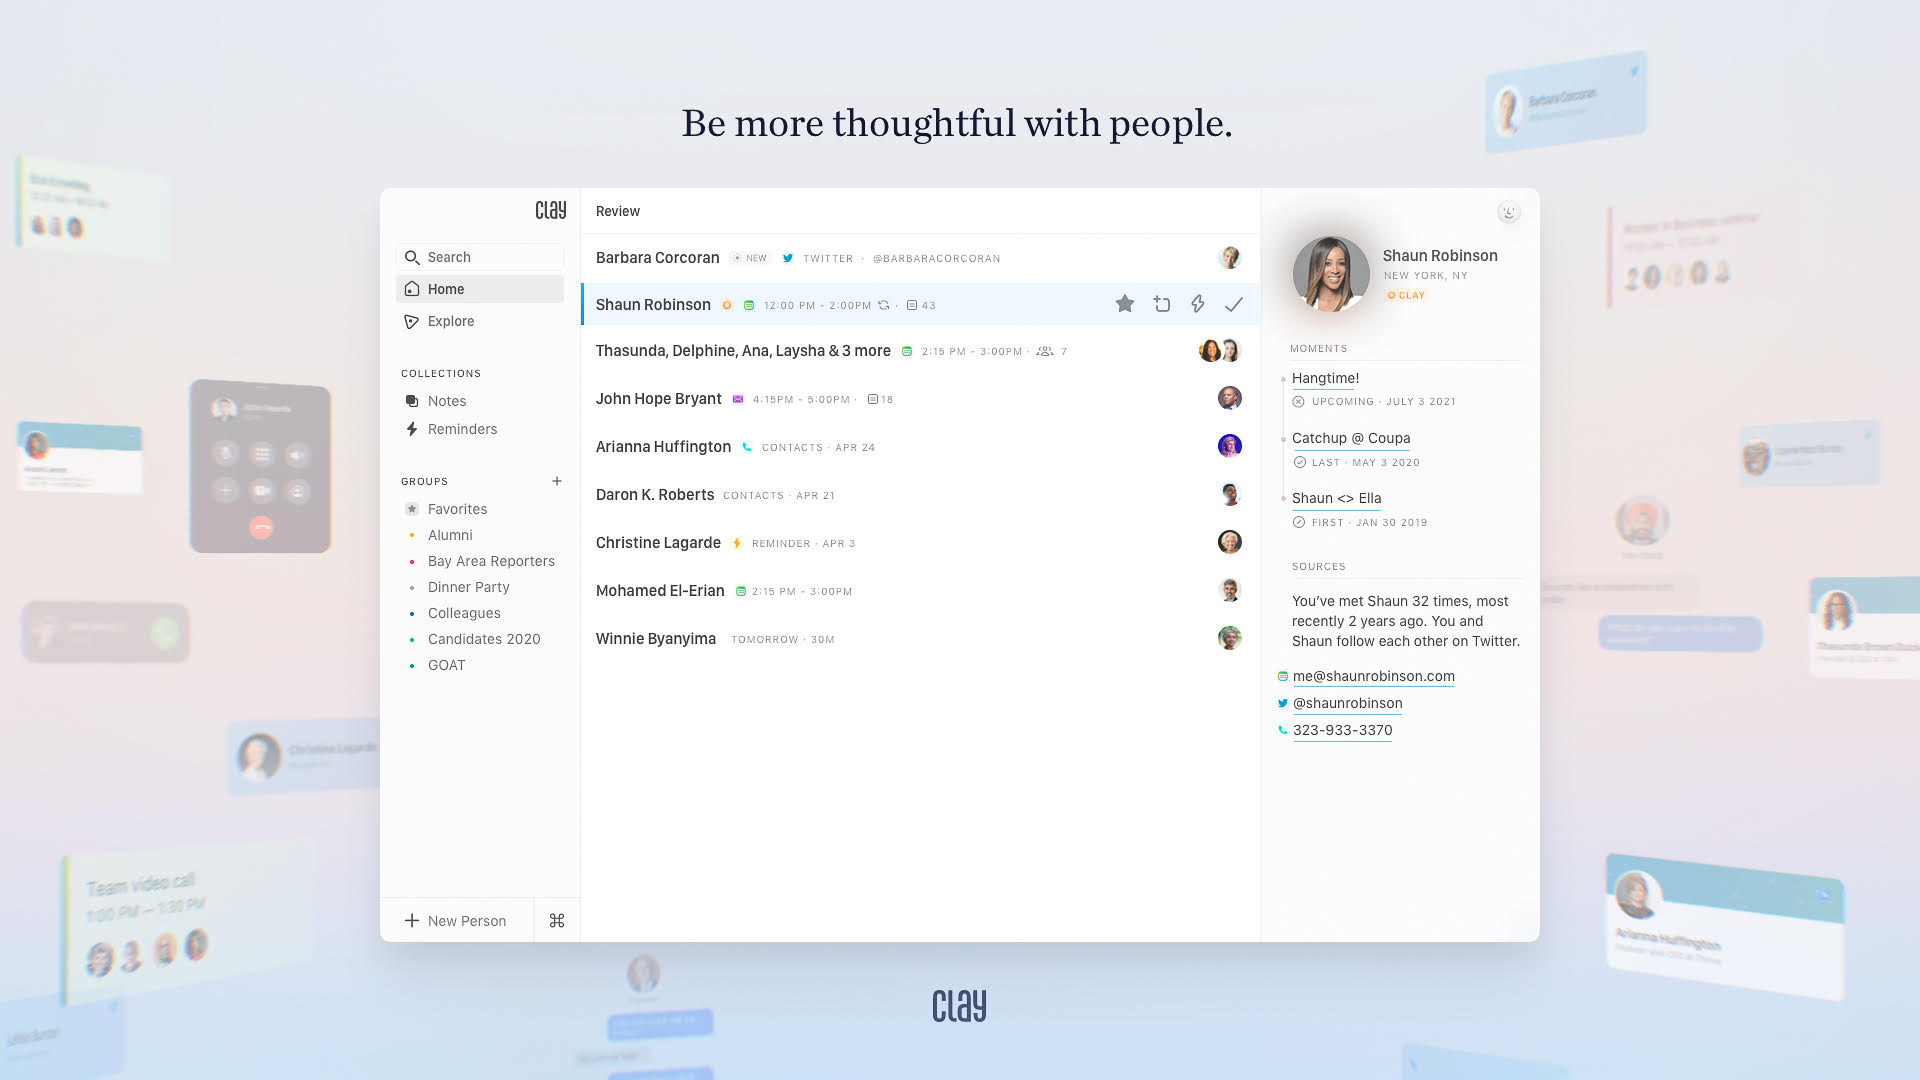 Clay is also available in light mode and offers many other features such as the world's best people search, groups to organize your contacts, and reconnect cadences so you don't fall out of touch.